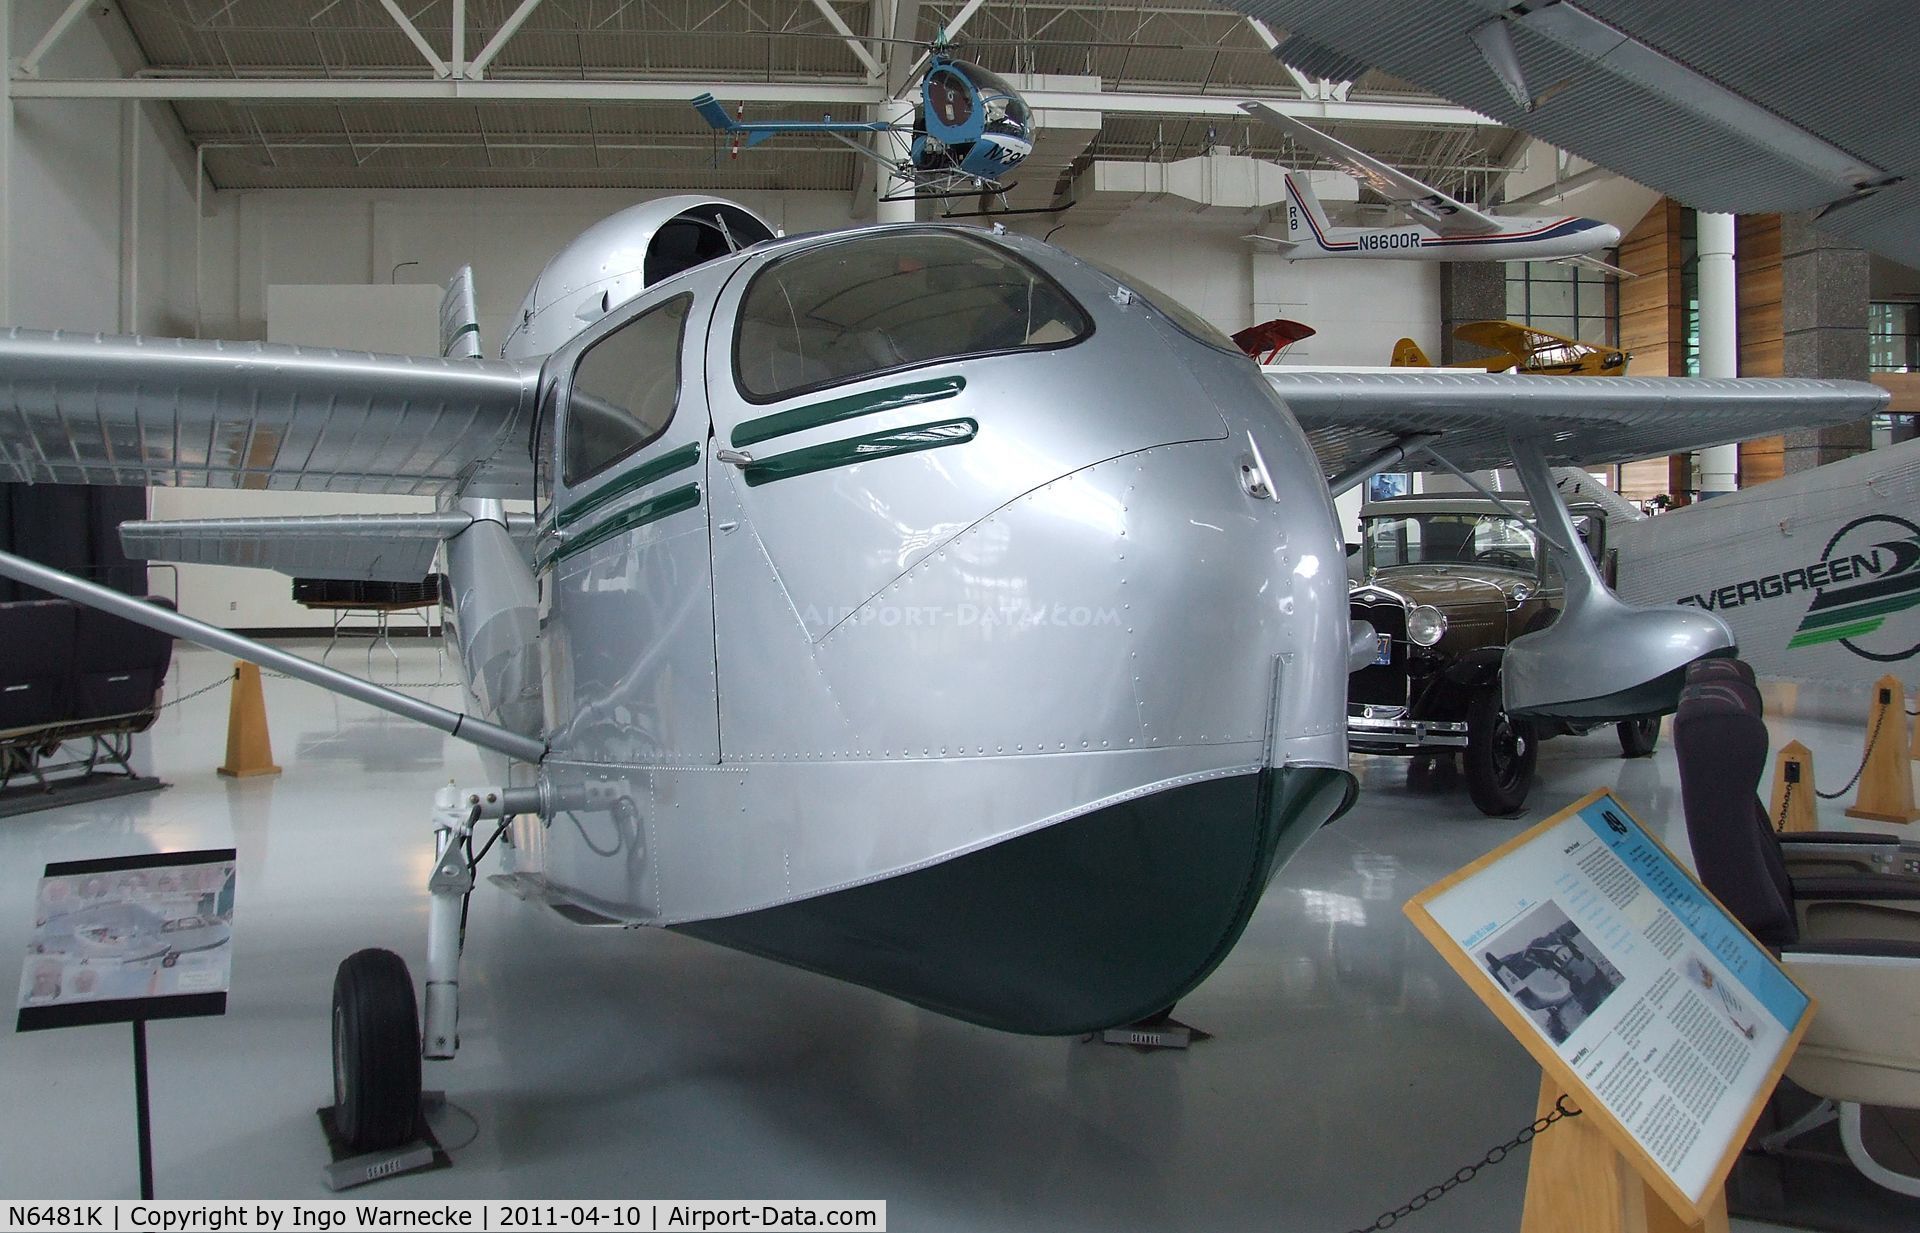 N6481K, 1947 Republic RC-3 Seabee C/N 736, Republic RC-3 Seabee at the Evergreen Aviation & Space Museum, McMinnville OR